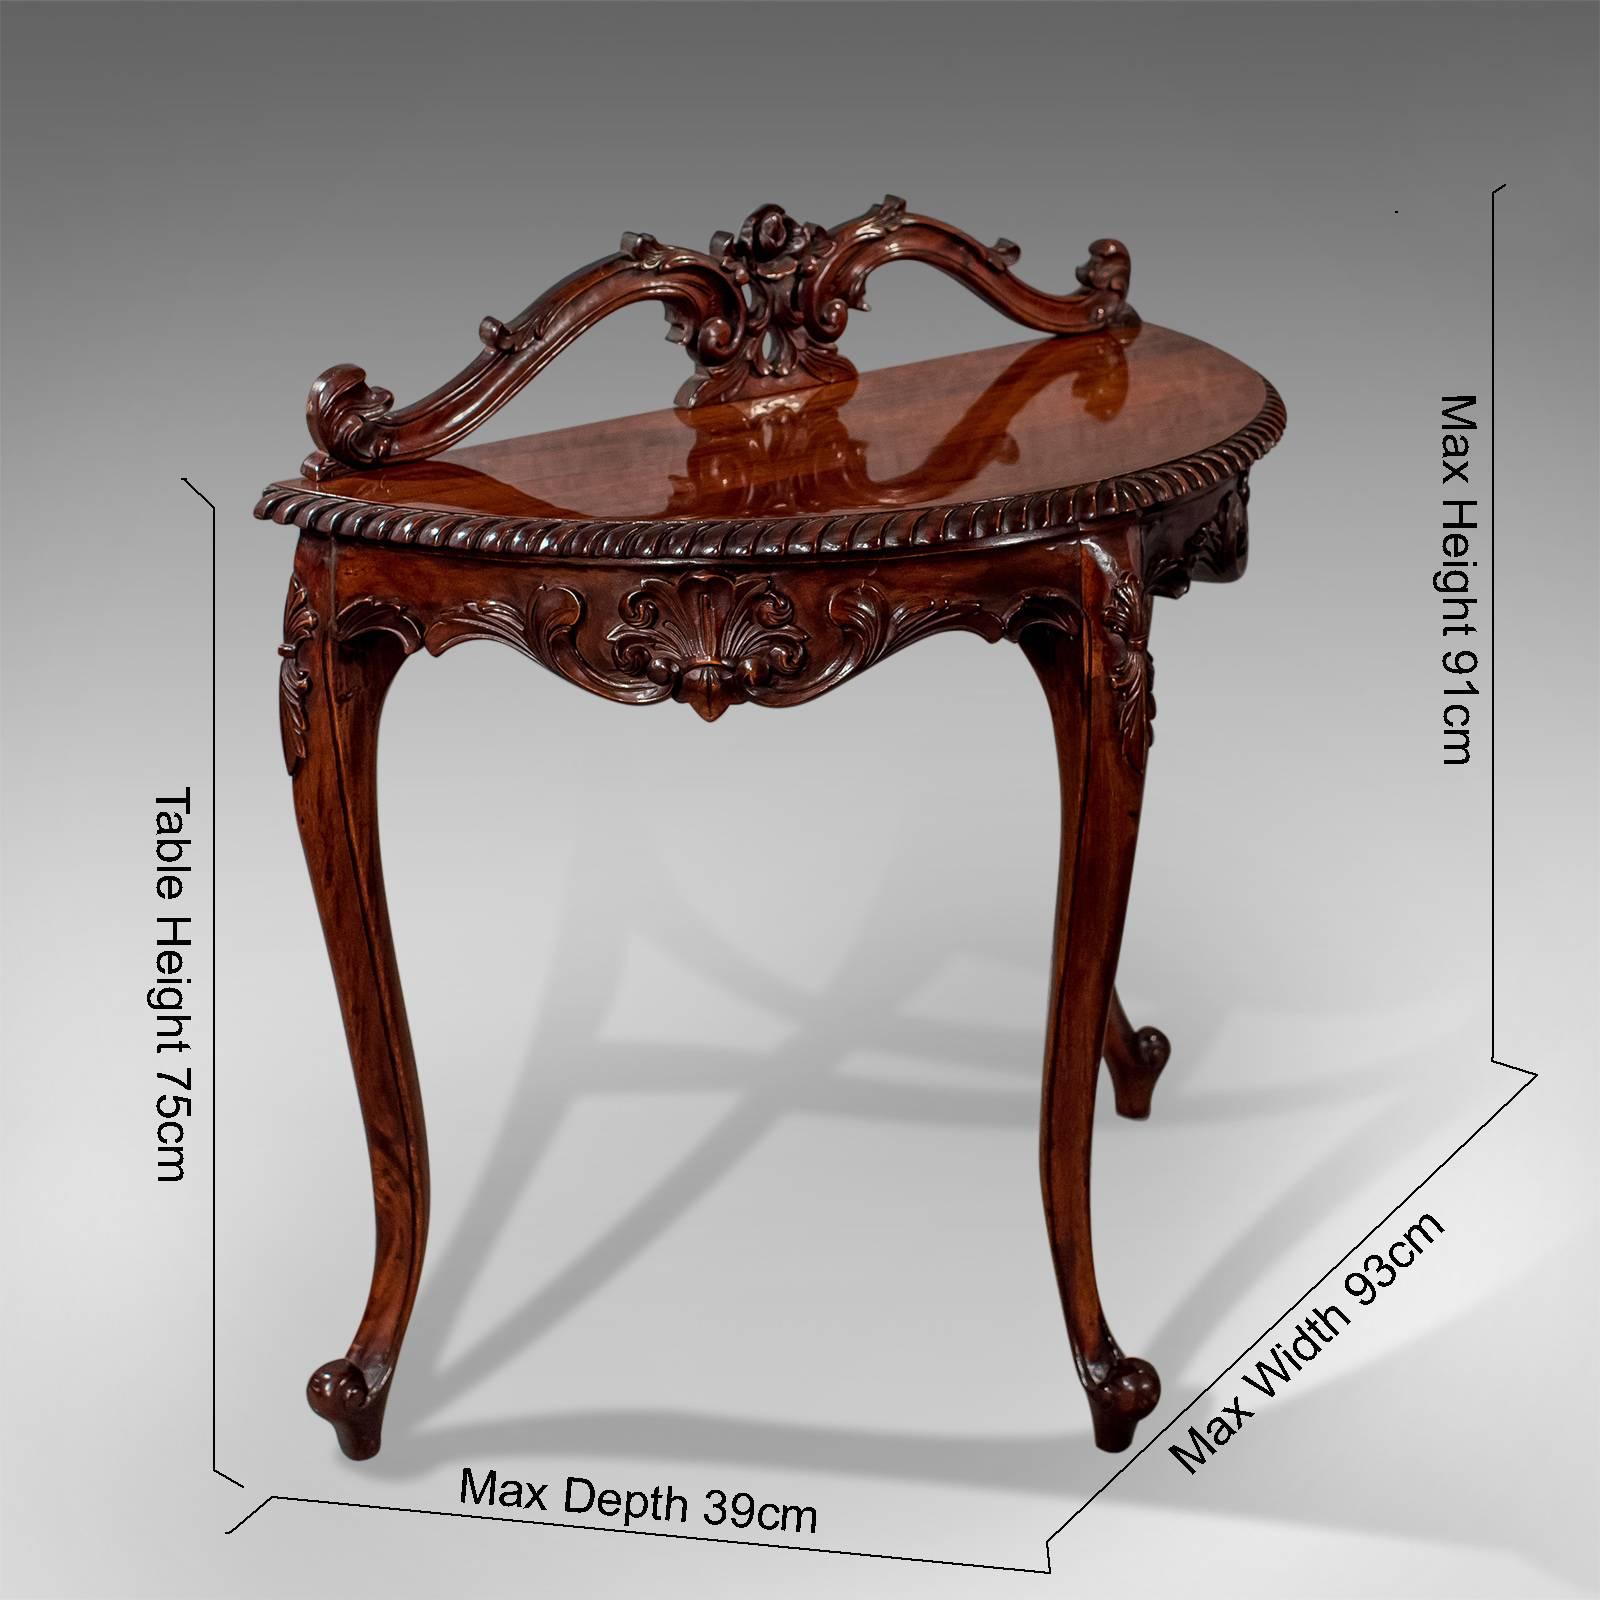 This is an ornate demilune console table dating to the late 20th century in the Regency form.

Displaying beautifully as a feature table
Attractive mahogany with lustrous sheen
Classic colour and a desirable grain

Demi-lune form with